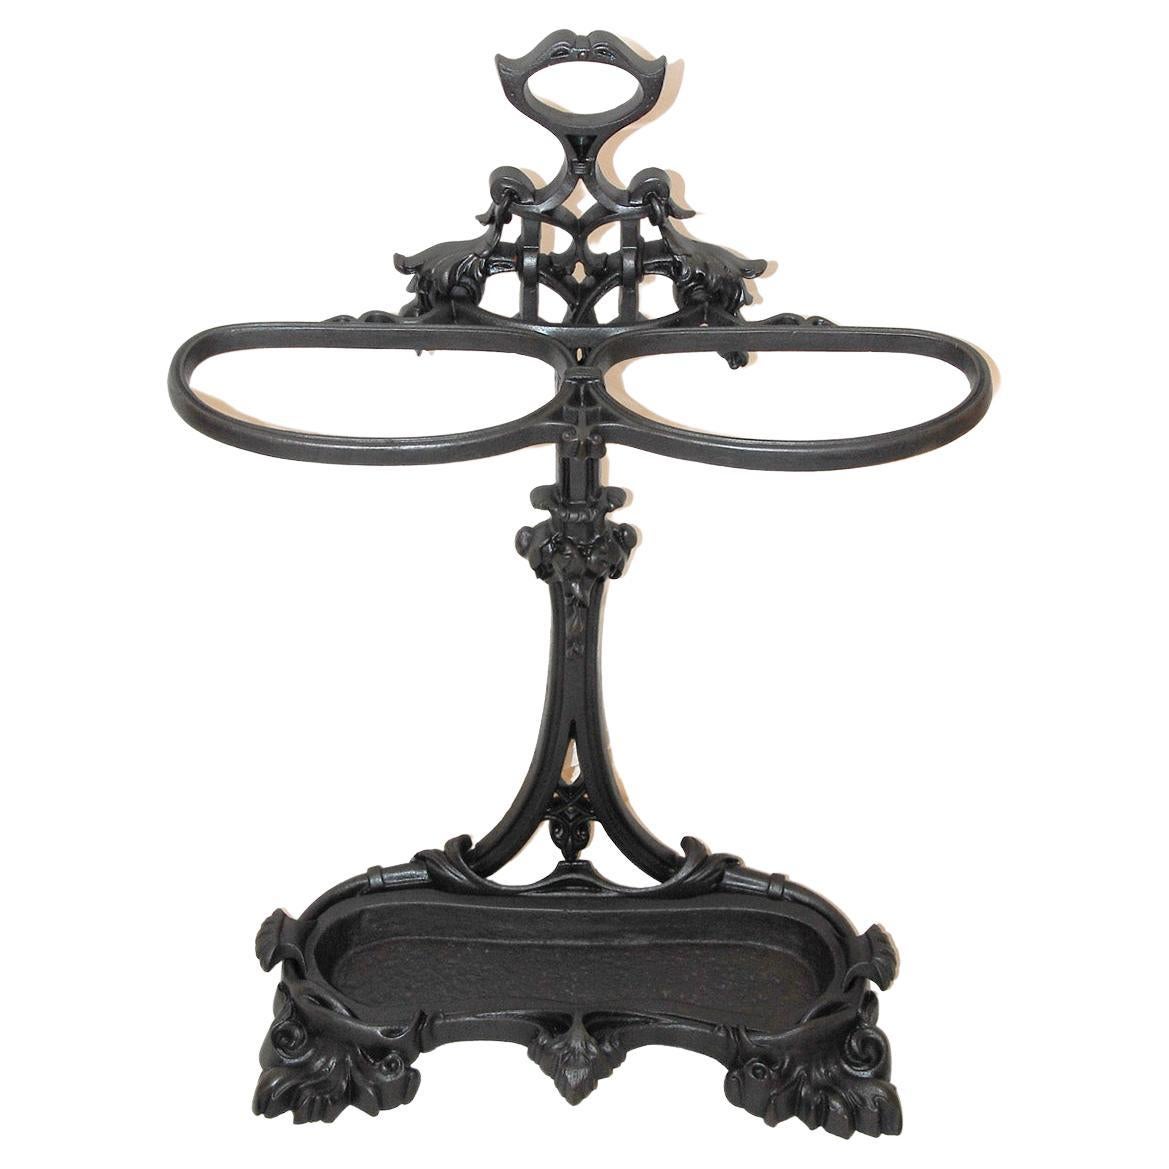 English Victorian Cast Iron Umbrella Stand, Walking Stick or Cane Stand